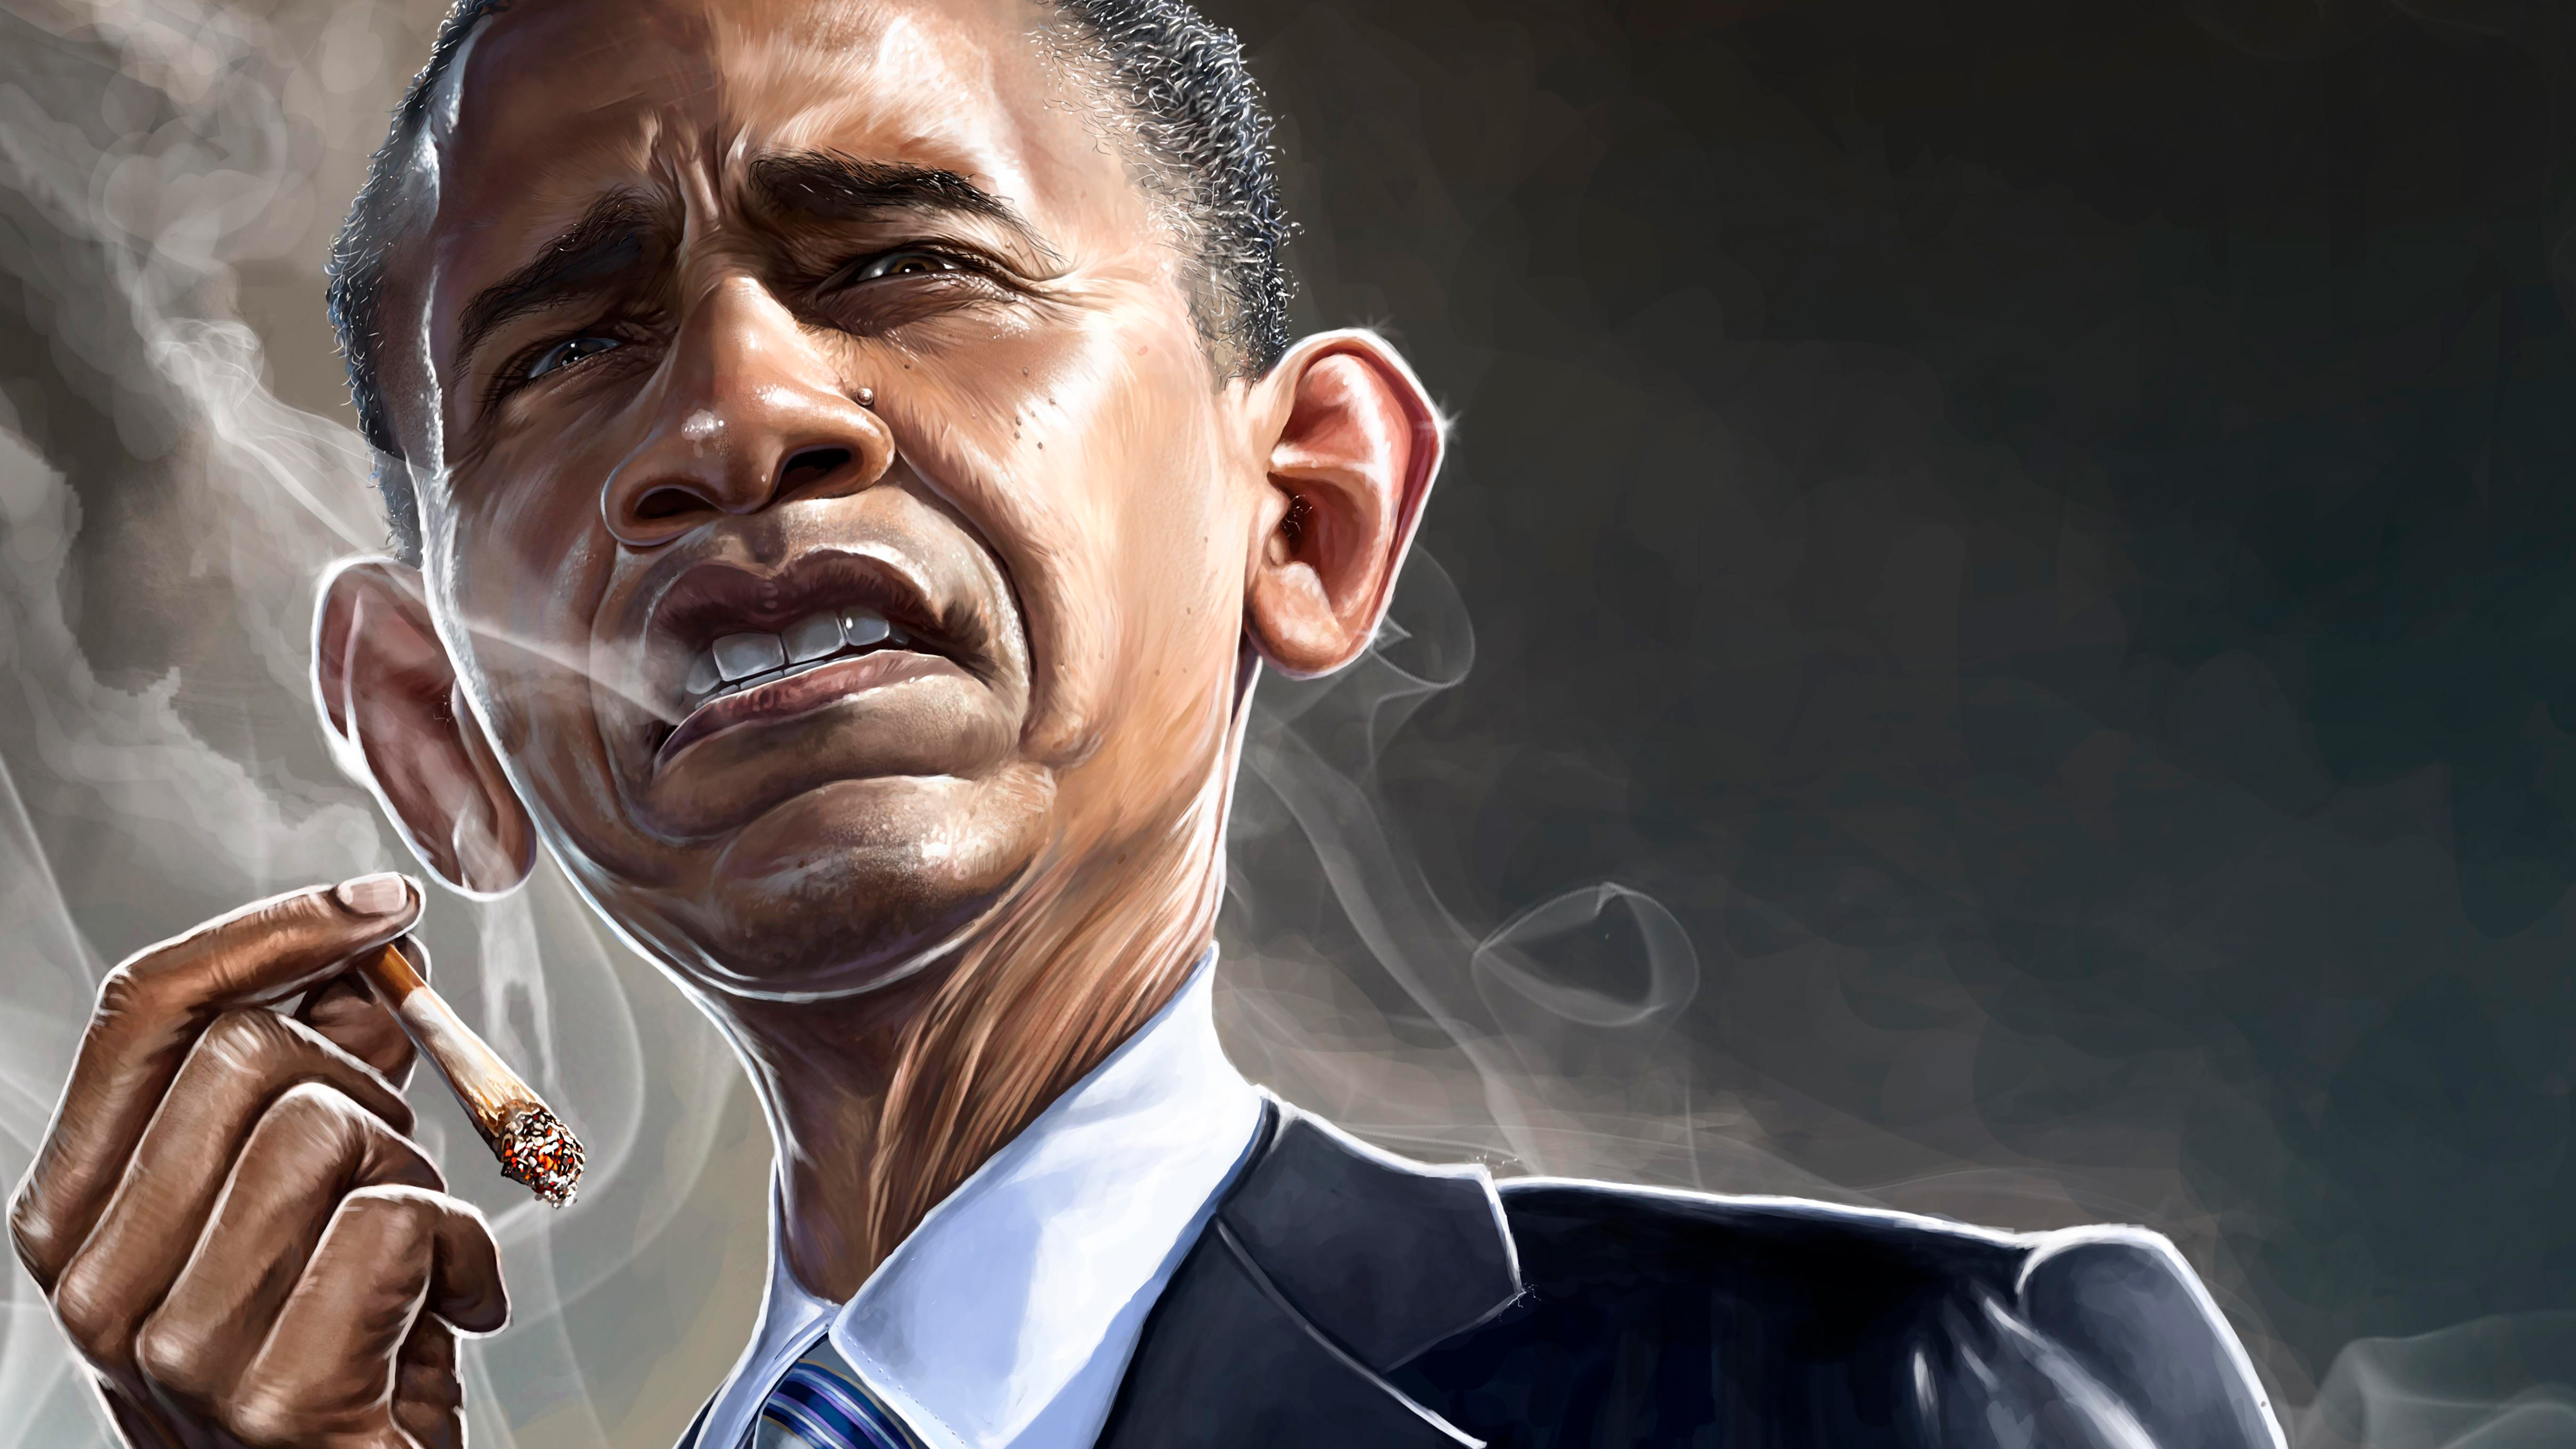 Obama Wallpapers